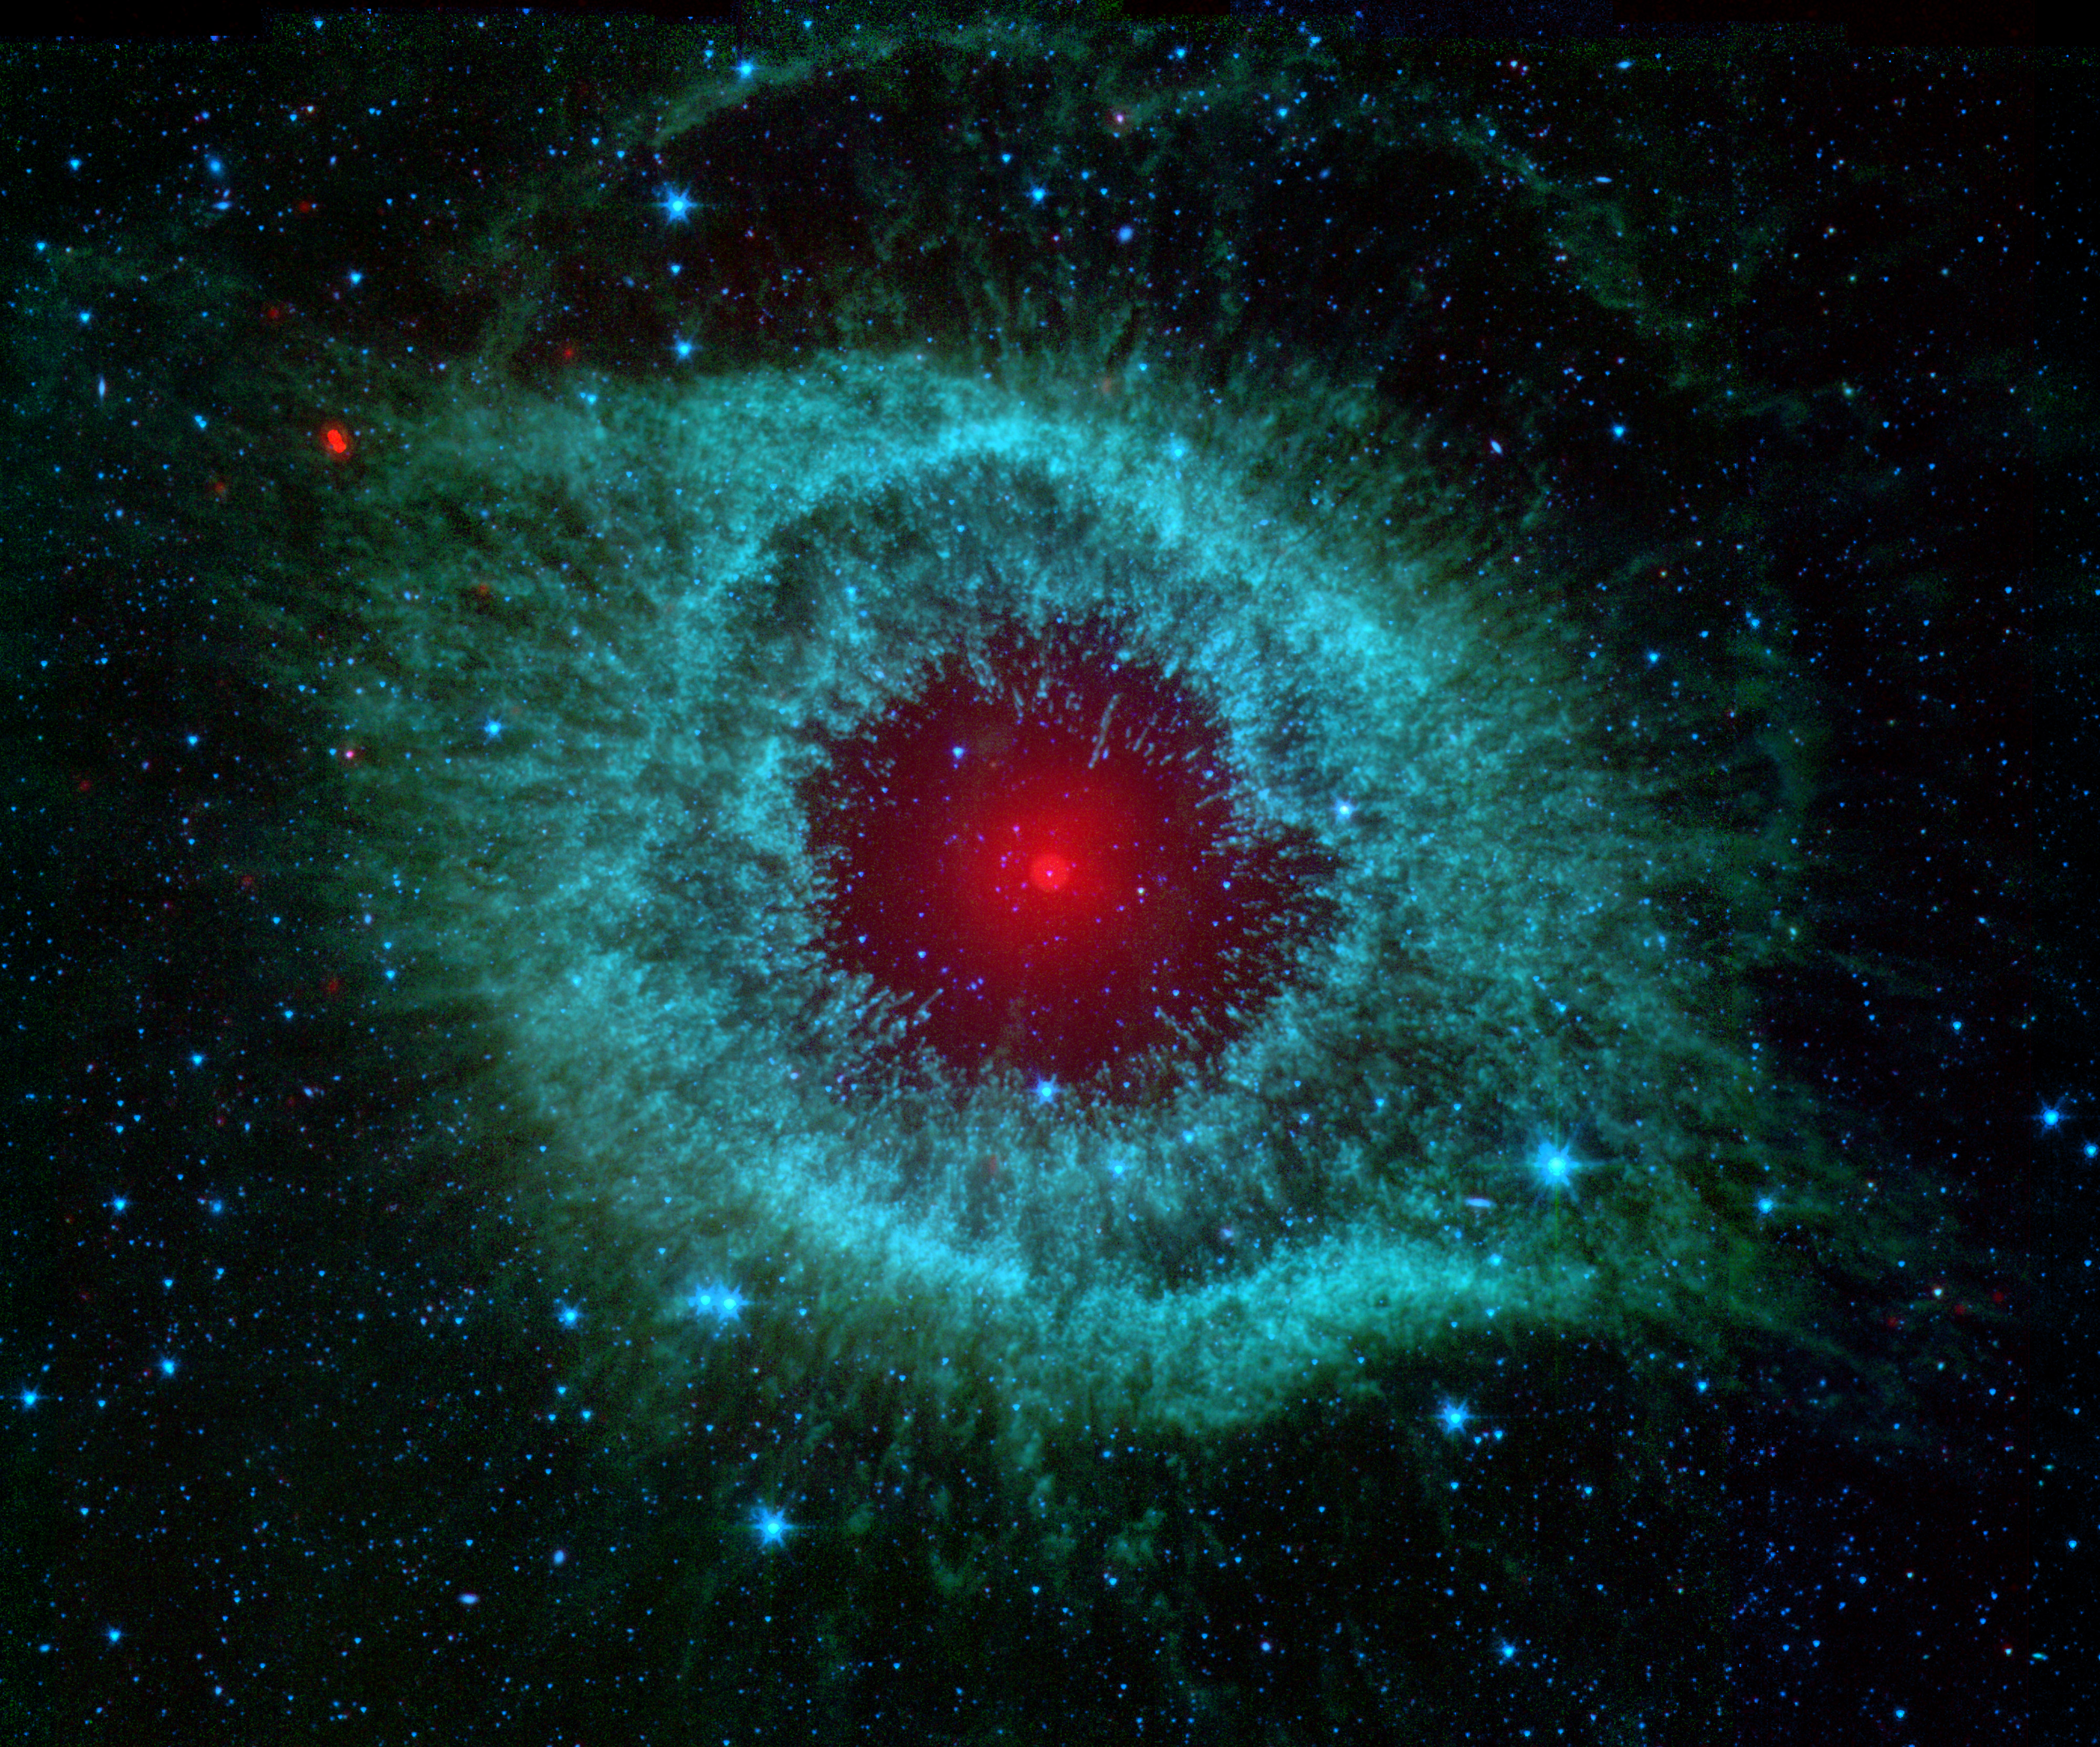 Helix Nebula: Some say Spitzer’s infrared view of the Helix nebula - a dying star and its scattered remains - resembles the eye a green monster. Credit: NASA/JPL-Caltech/Univ.of Ariz.